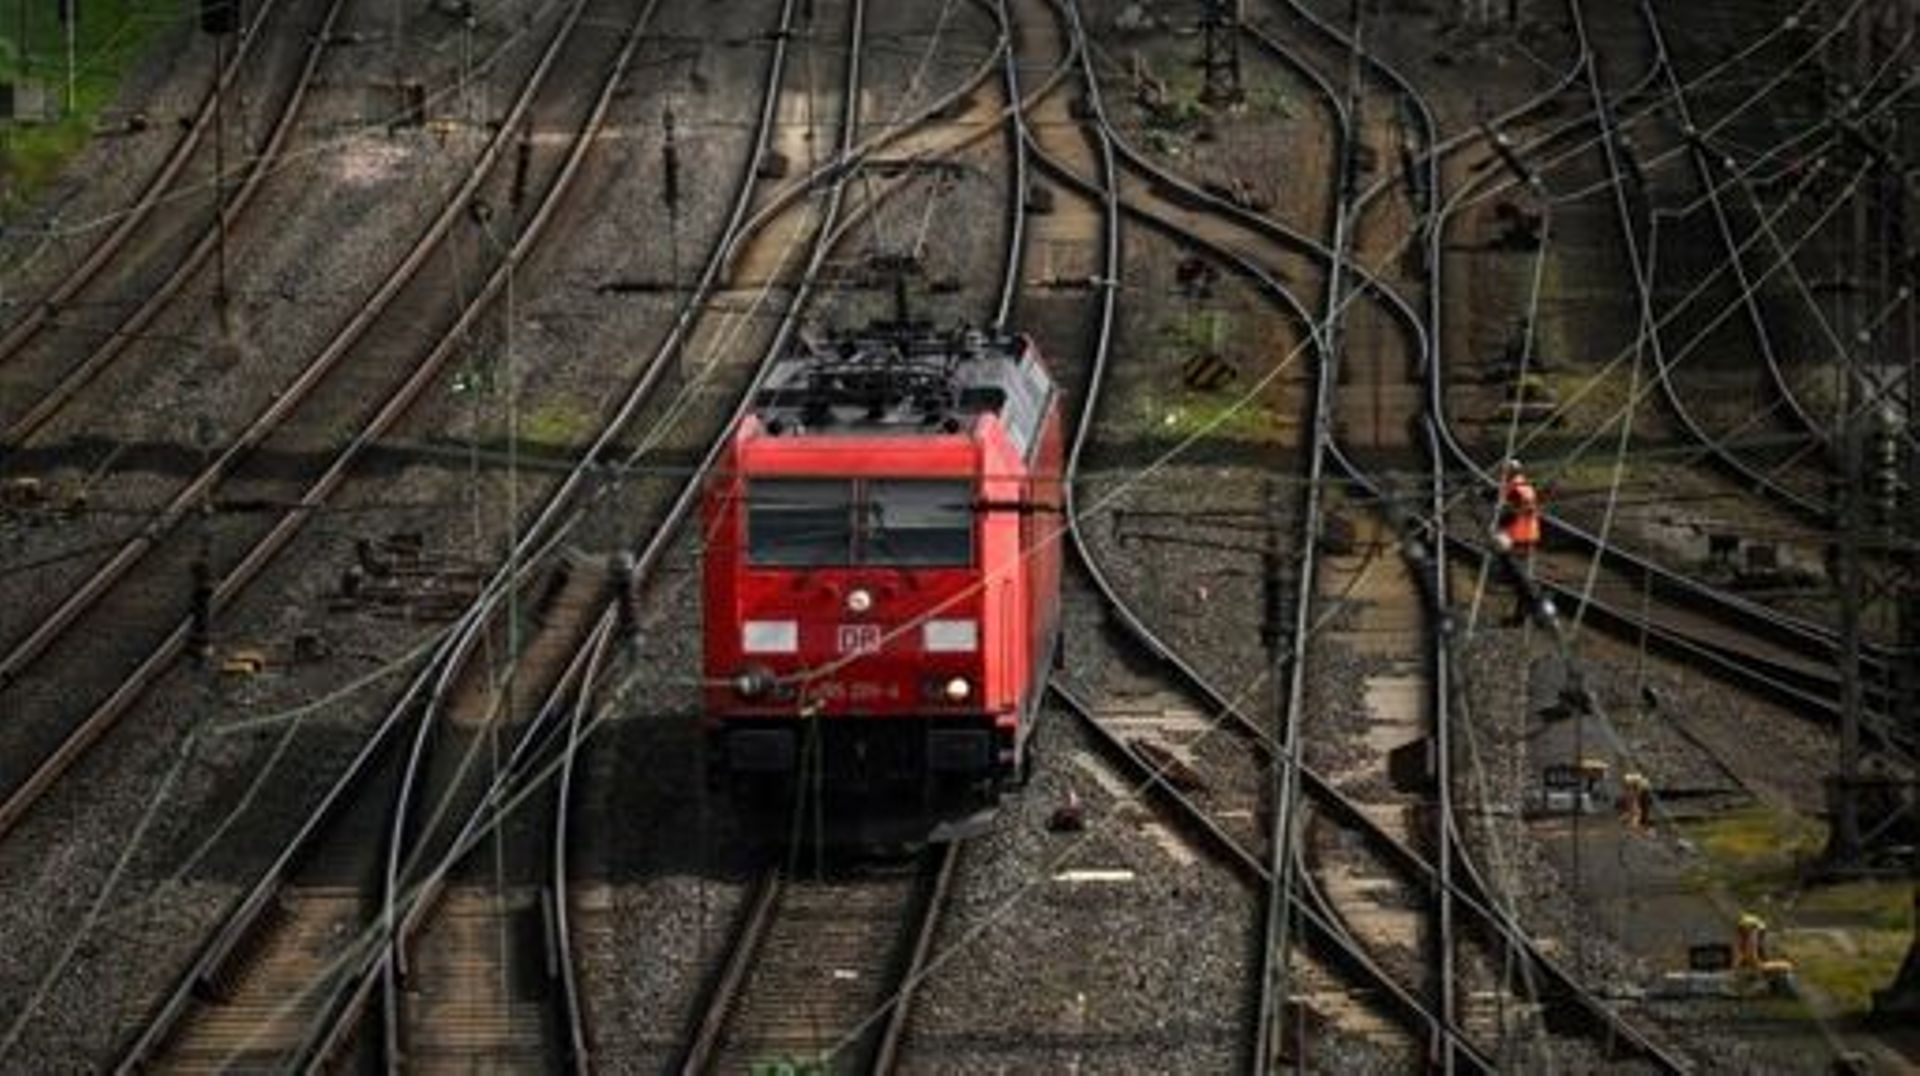 A worker walks past a locomotive on train tracks of German railway operator Deutsche Bahn at the railway freight station in Hagen, western Germany, on March 24, 2023. Transport across much of Germany will be paralysed on Monday, March 27, 2023, as workers